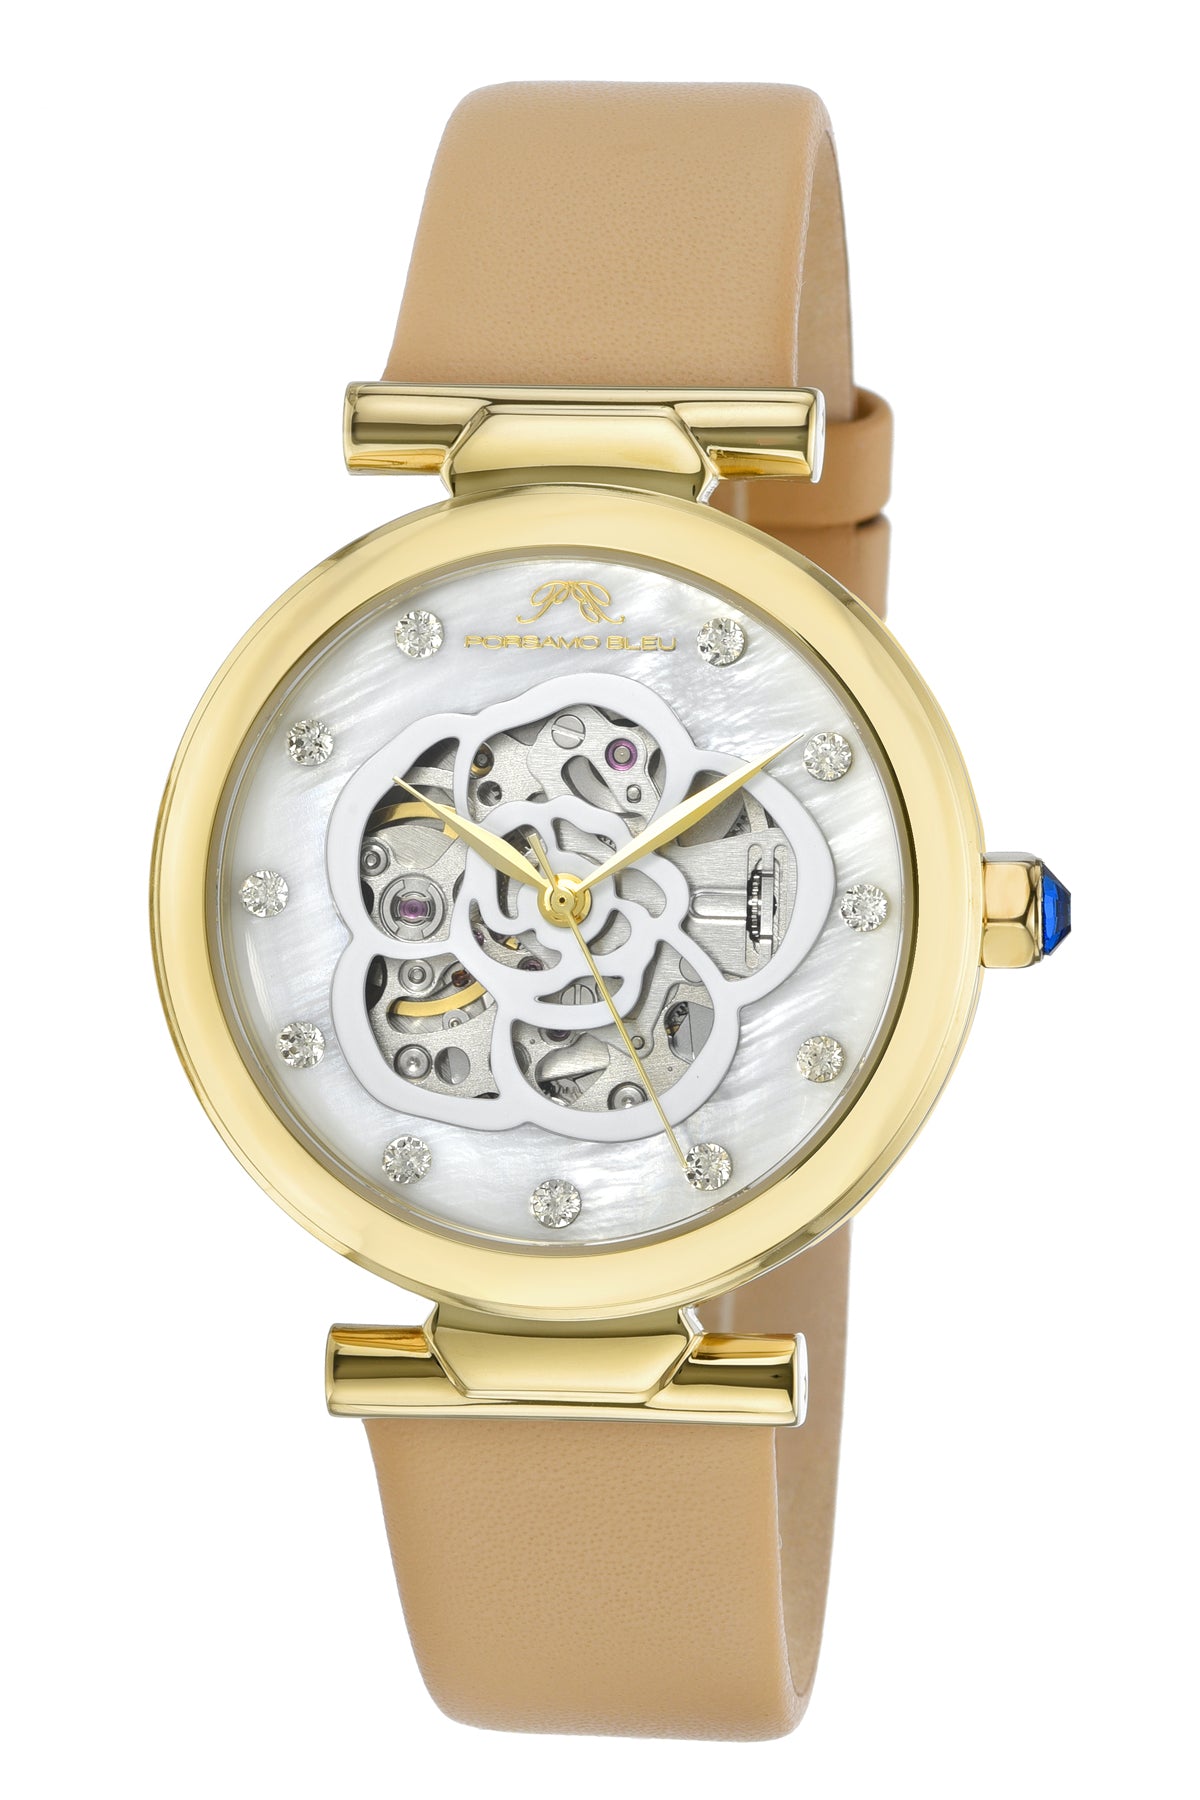 Porsamo Bleu Laura Luxury Automatic Topaz Women's Genuine Leather Band Watch, With Mother Of Pearl Skeleton Dial, Gold, Beige 1212BLAL